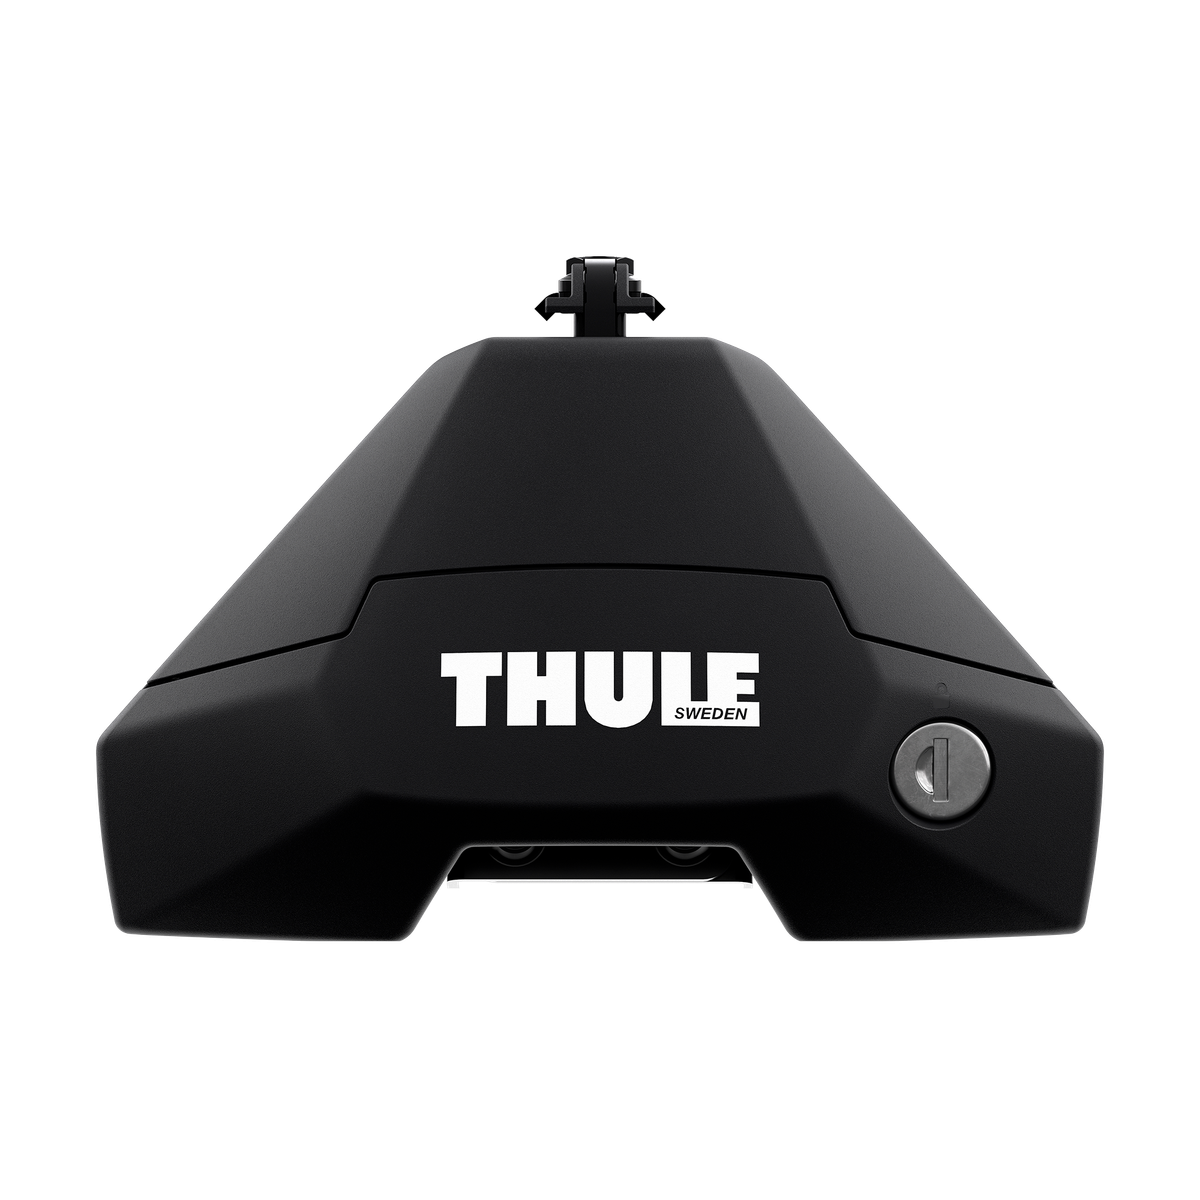 Thule Clamp Evo foot for vehicles 4-pack black